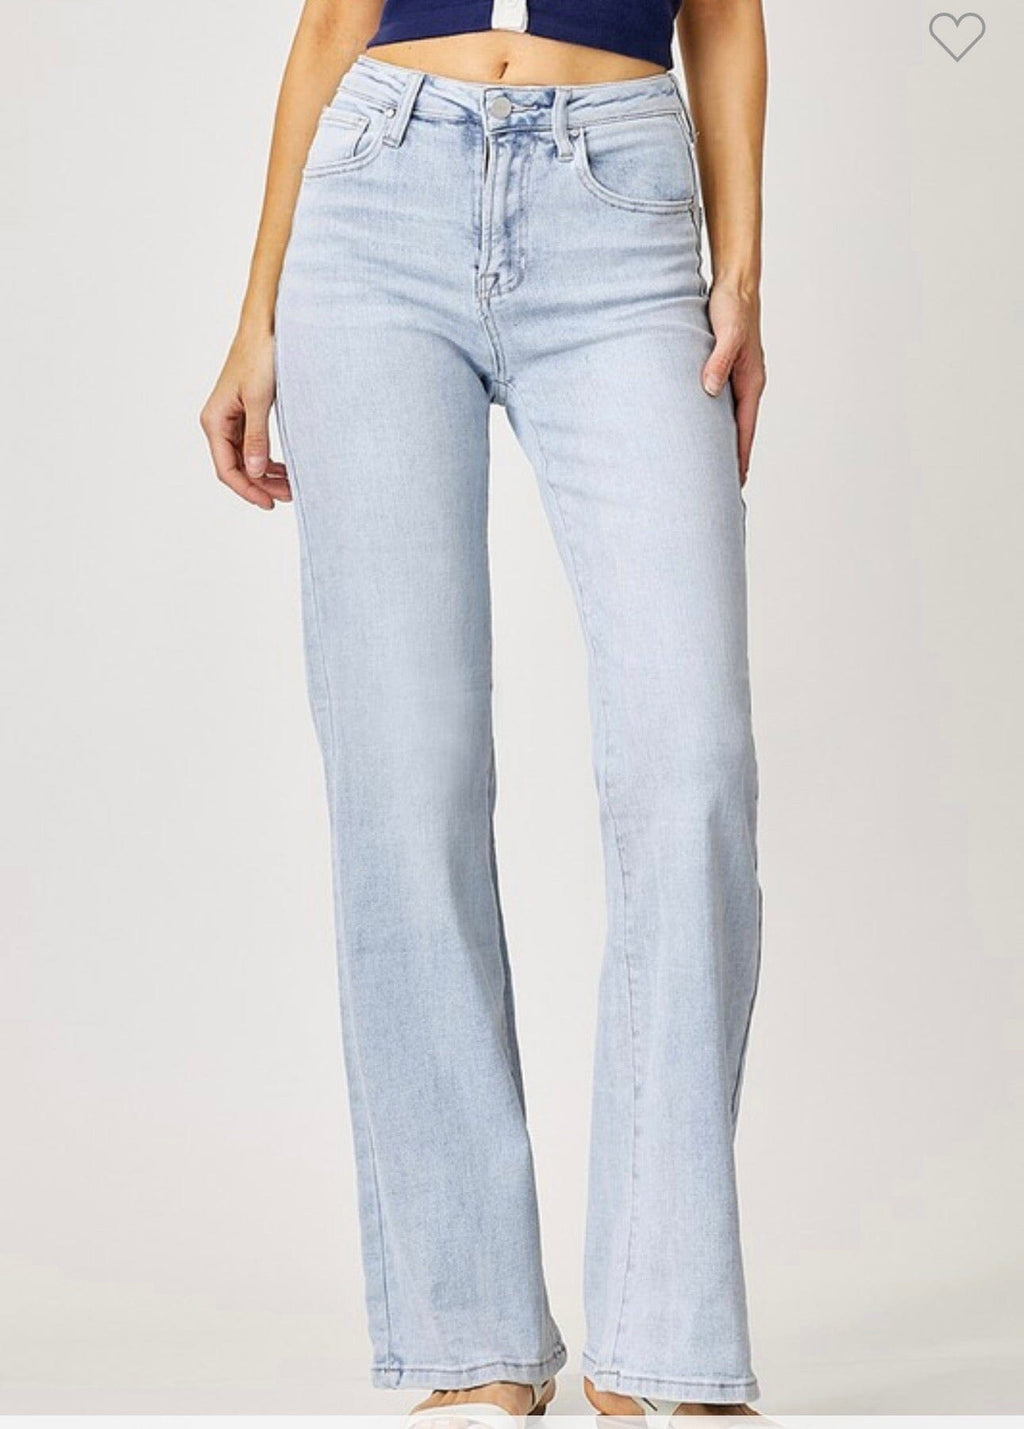 The 90's Wide Leg Jeans – My-Kim Collection